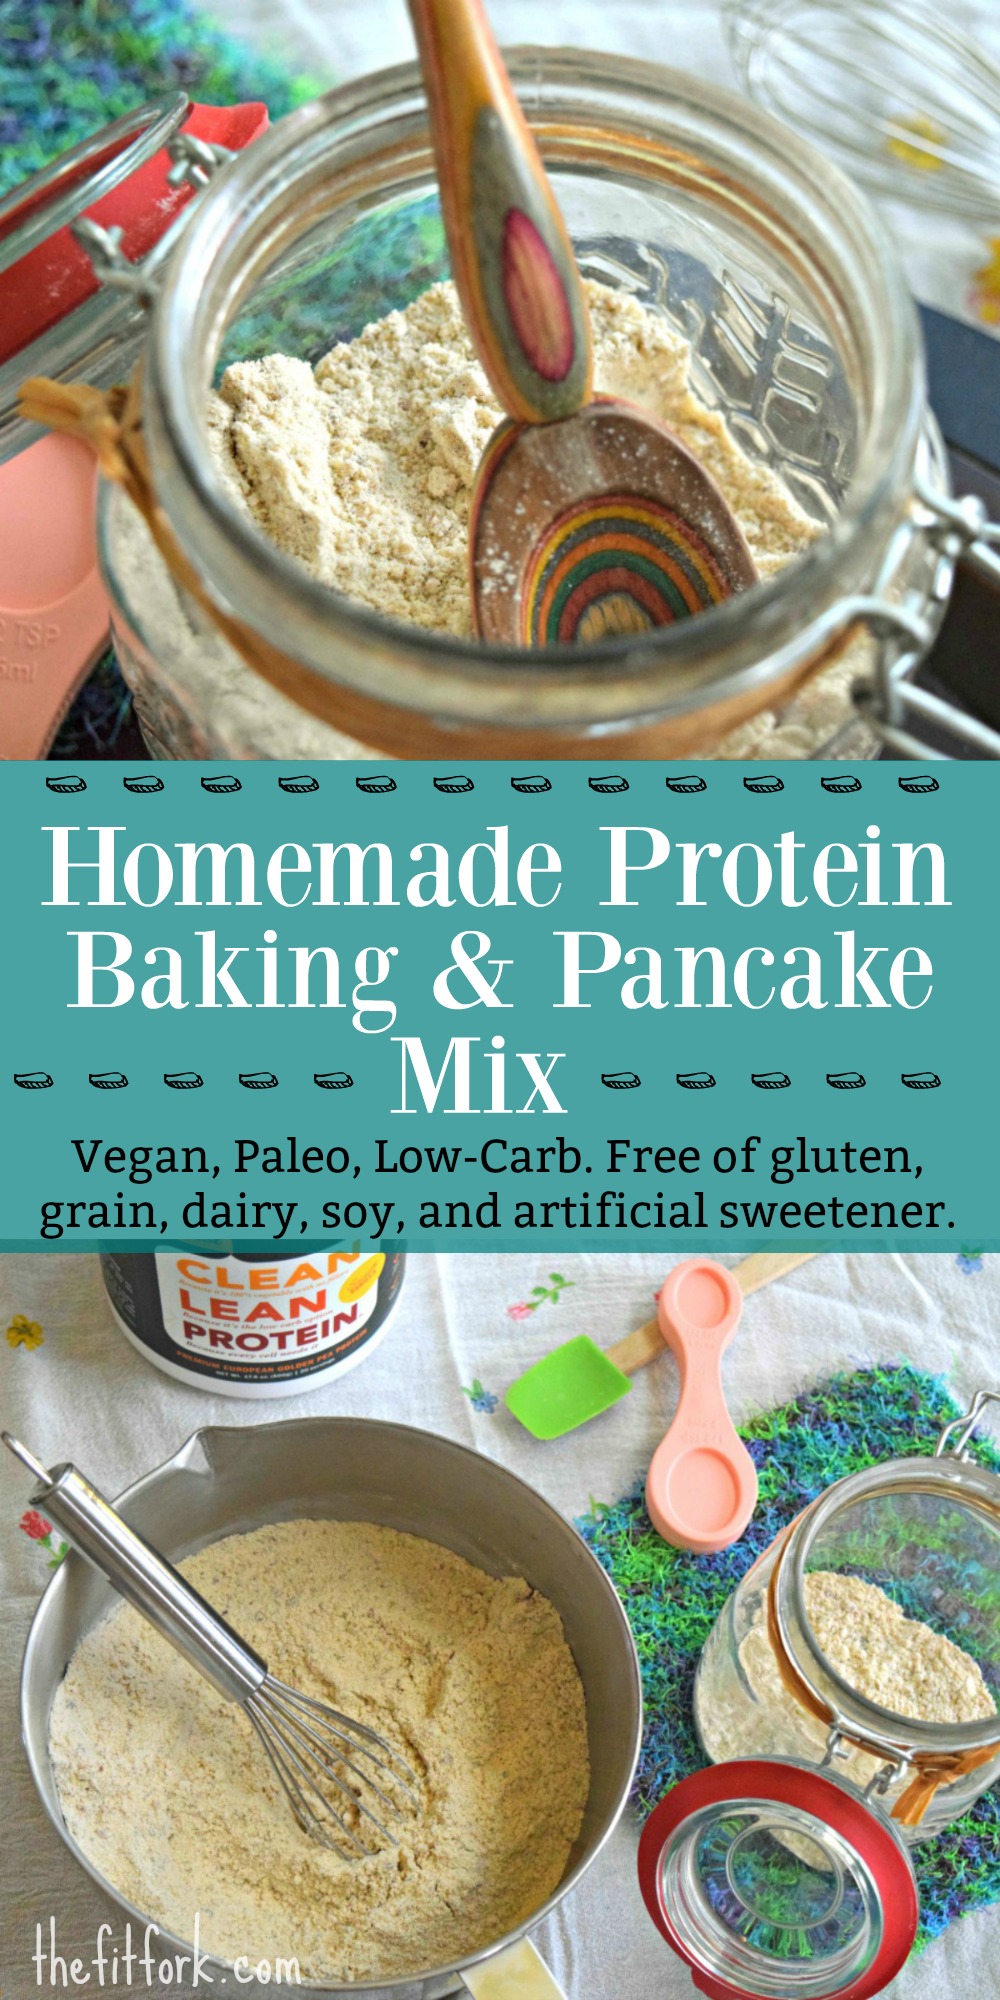 Paleo Protein Baking and Pancake Mix lets you enjoy baked goods without grain, gluten, soy, and dairy. This homemade baking mix is a staple in my kitchen.